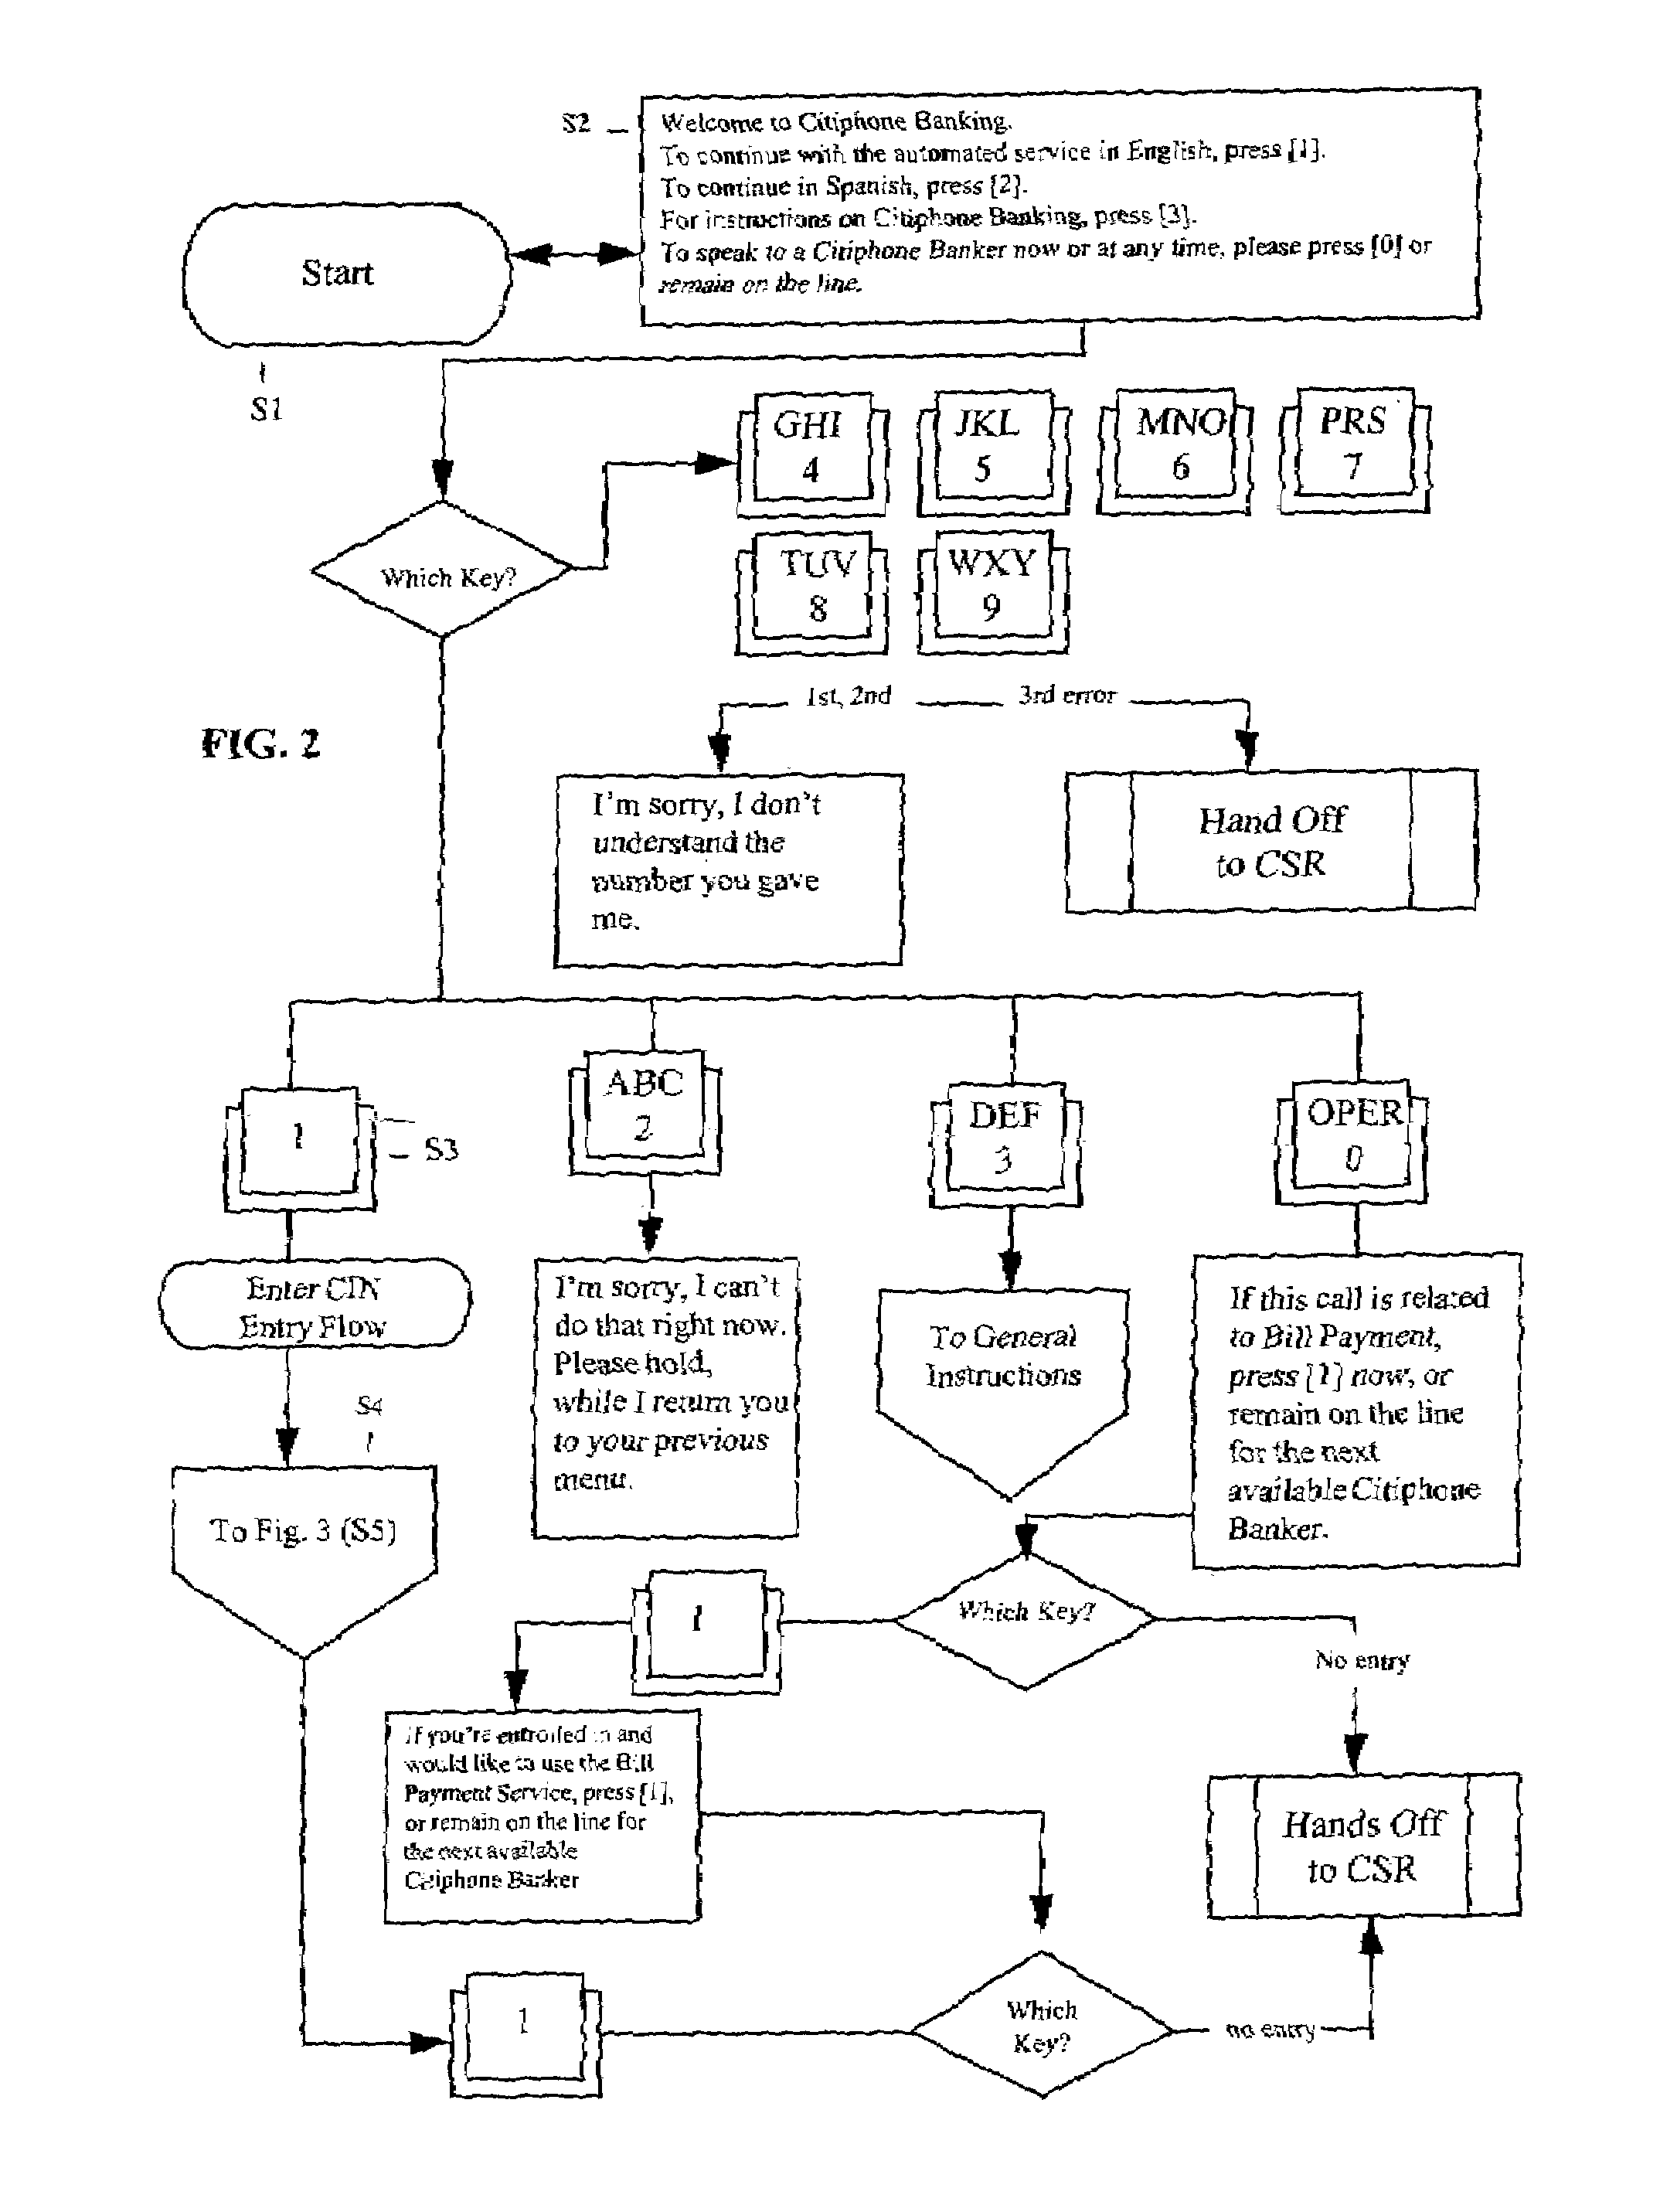 System and method for automated bill payment service